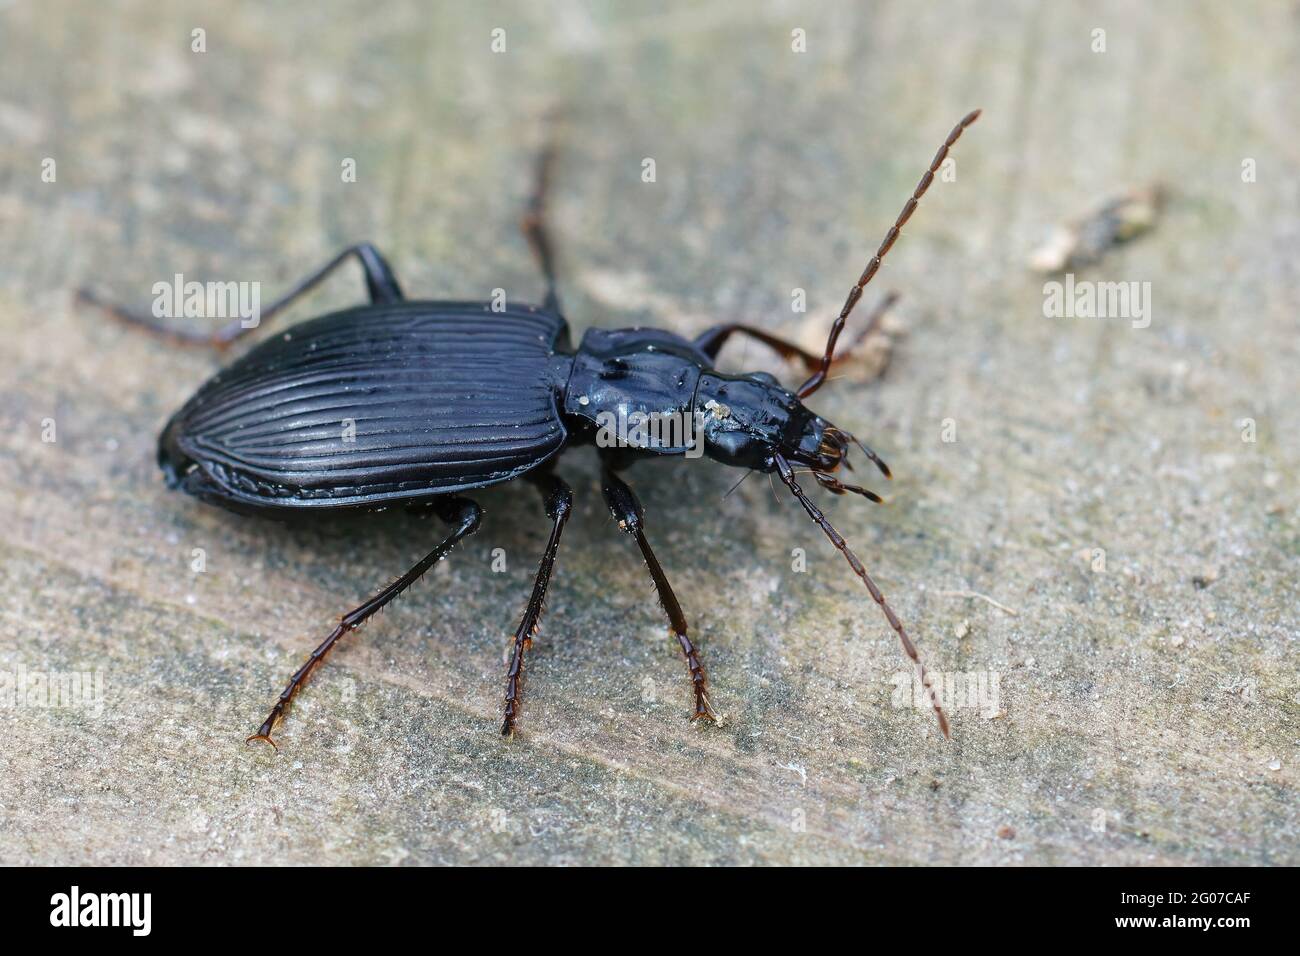 Closeup shot of a black ground beetle on a rough surface Stock Photo